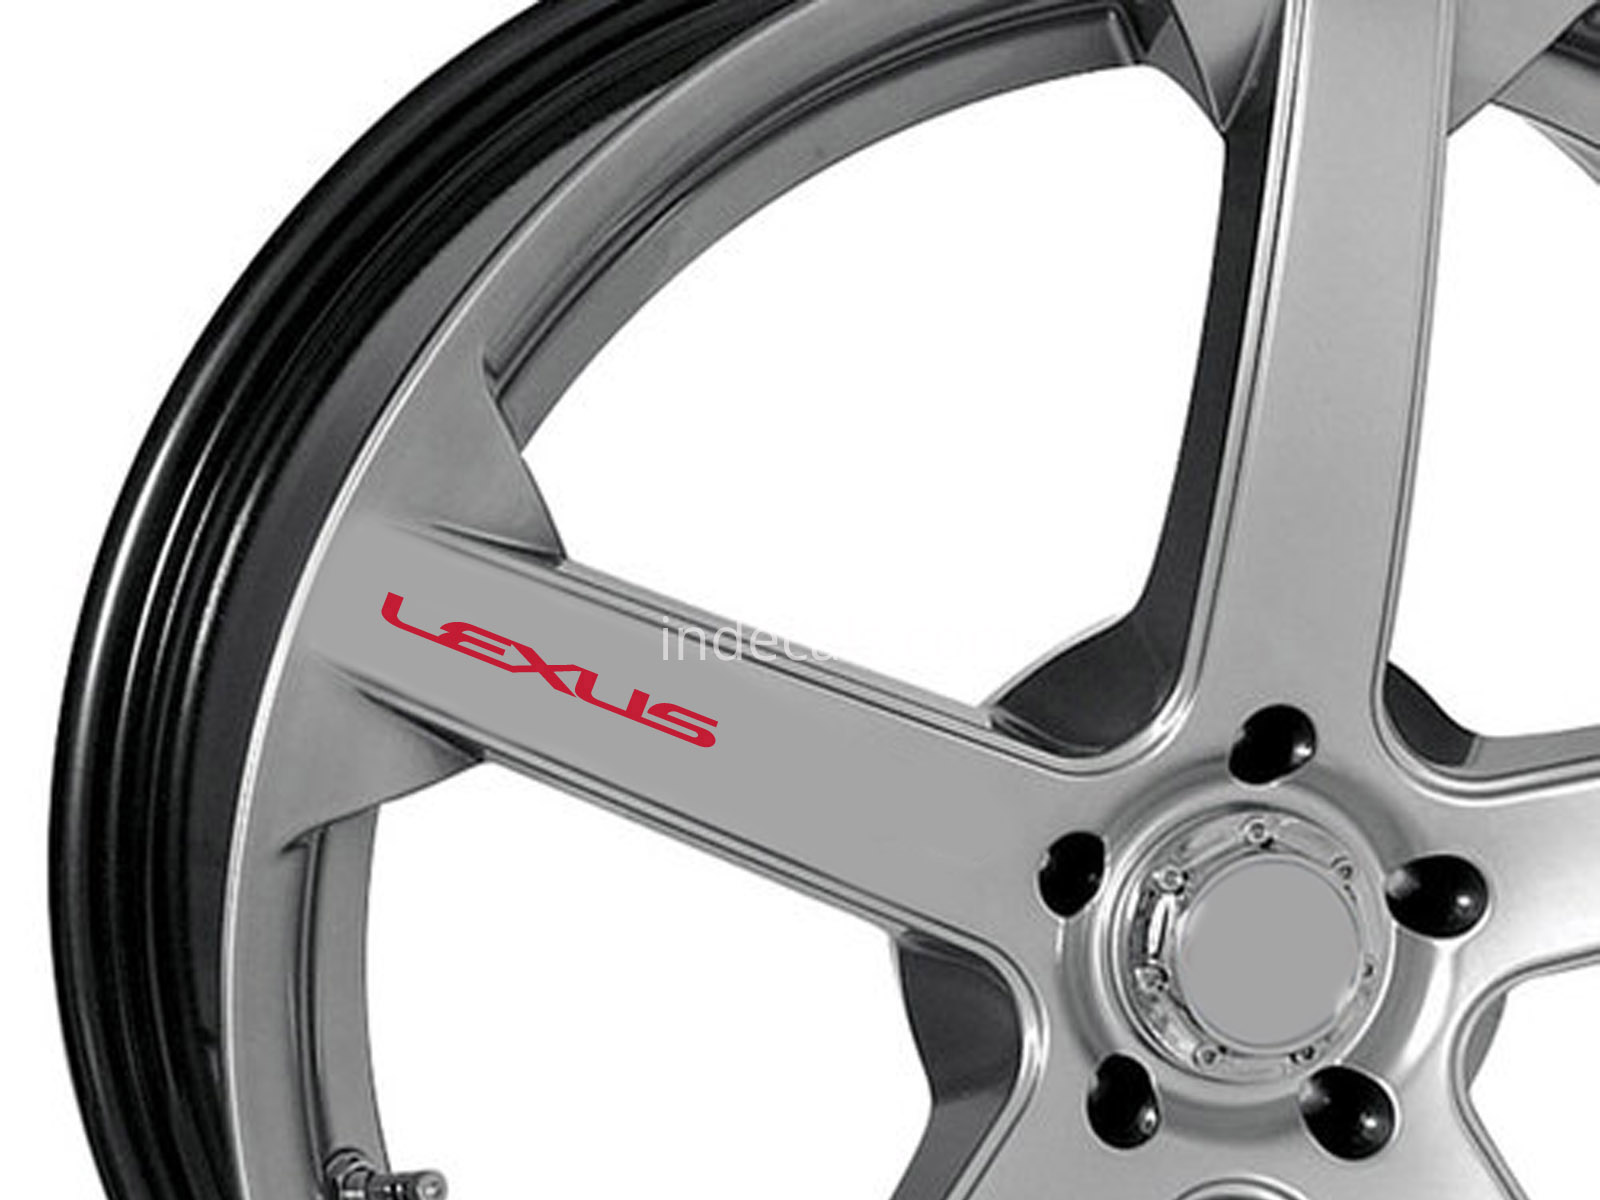 6 x Lexus Stickers for Wheels - Red